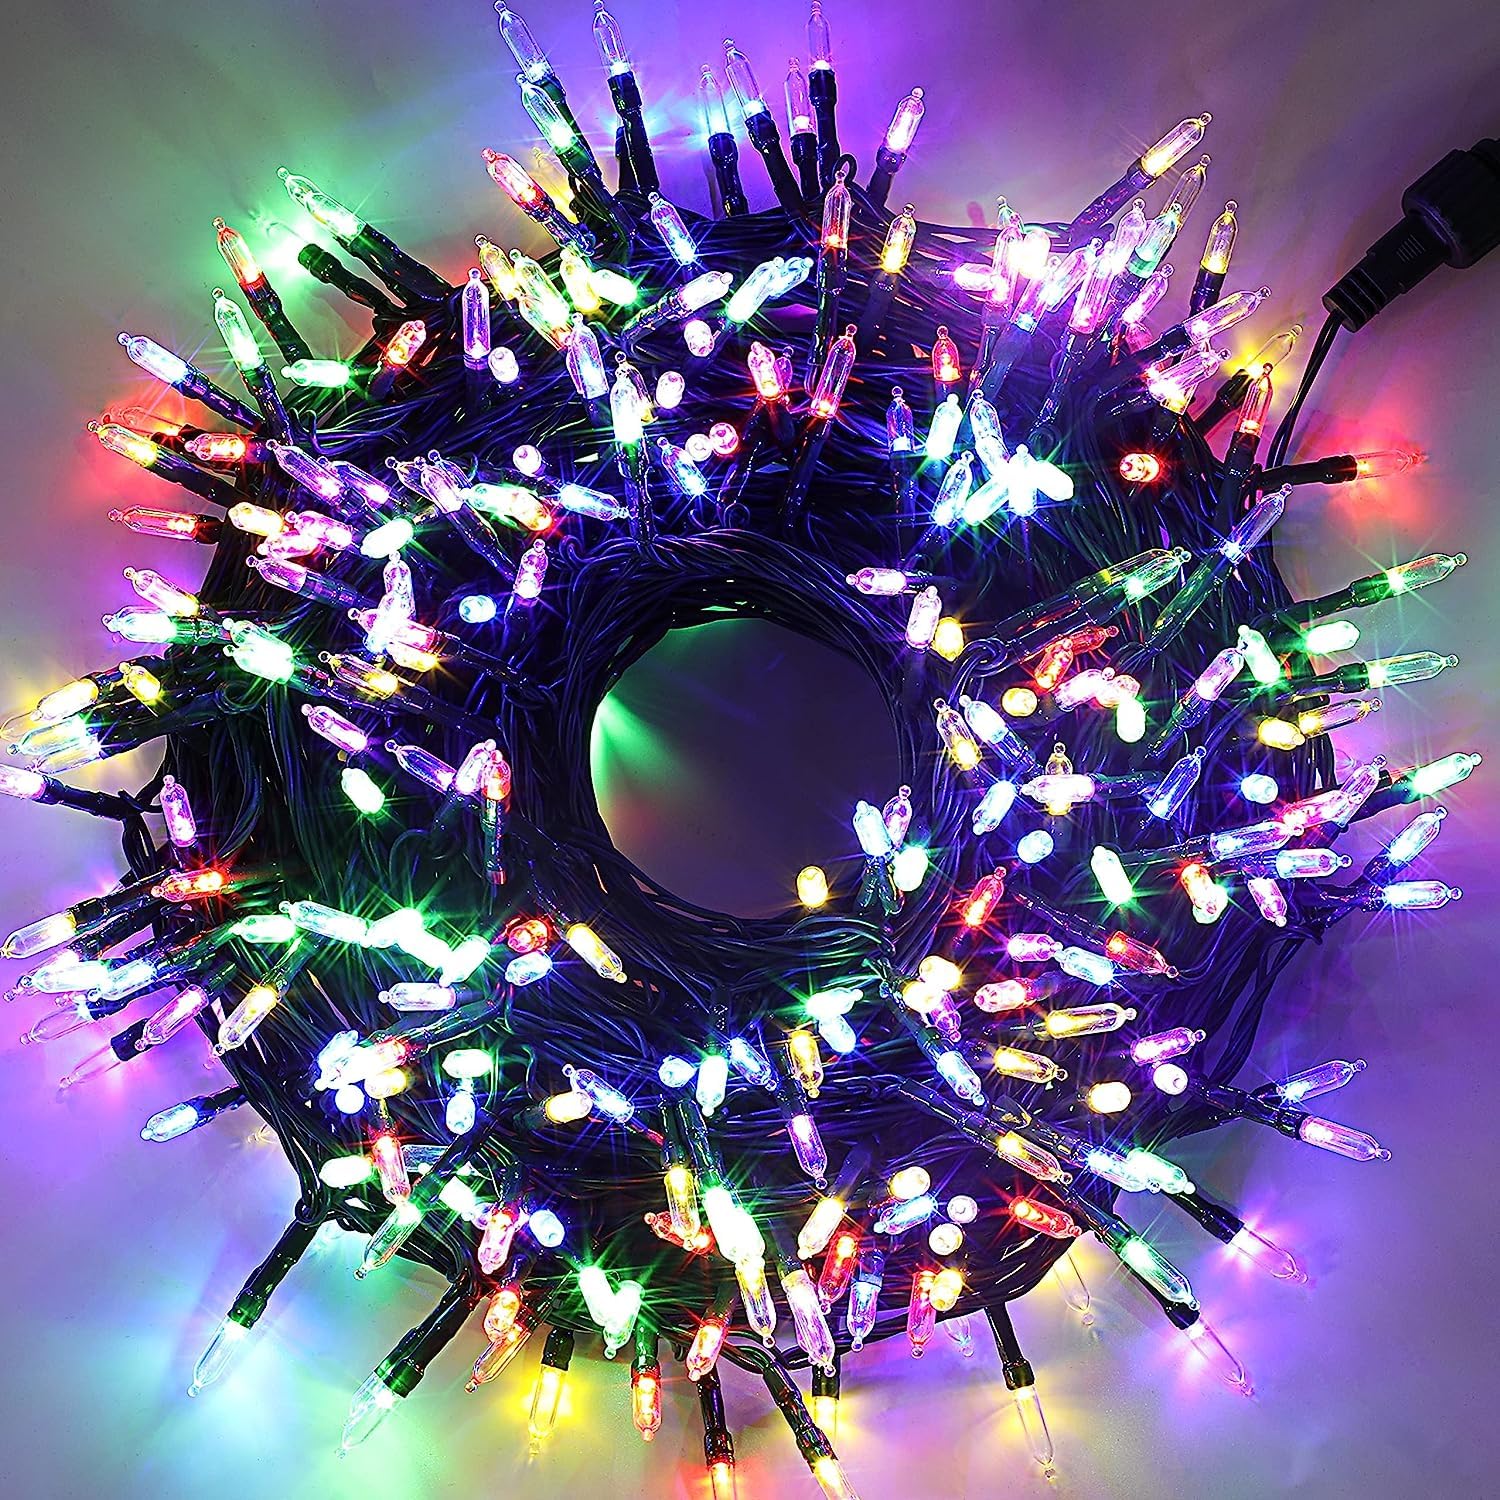 VIO 200 LED String Lights for Indoor and Outdoor Use, Colored Festive Lights, Plug-in Twinkle Lights for Trees, Room, Bedroom, Wedding, Birthday, Eid, Christmas, Diwali Decorations. (Multicolor)